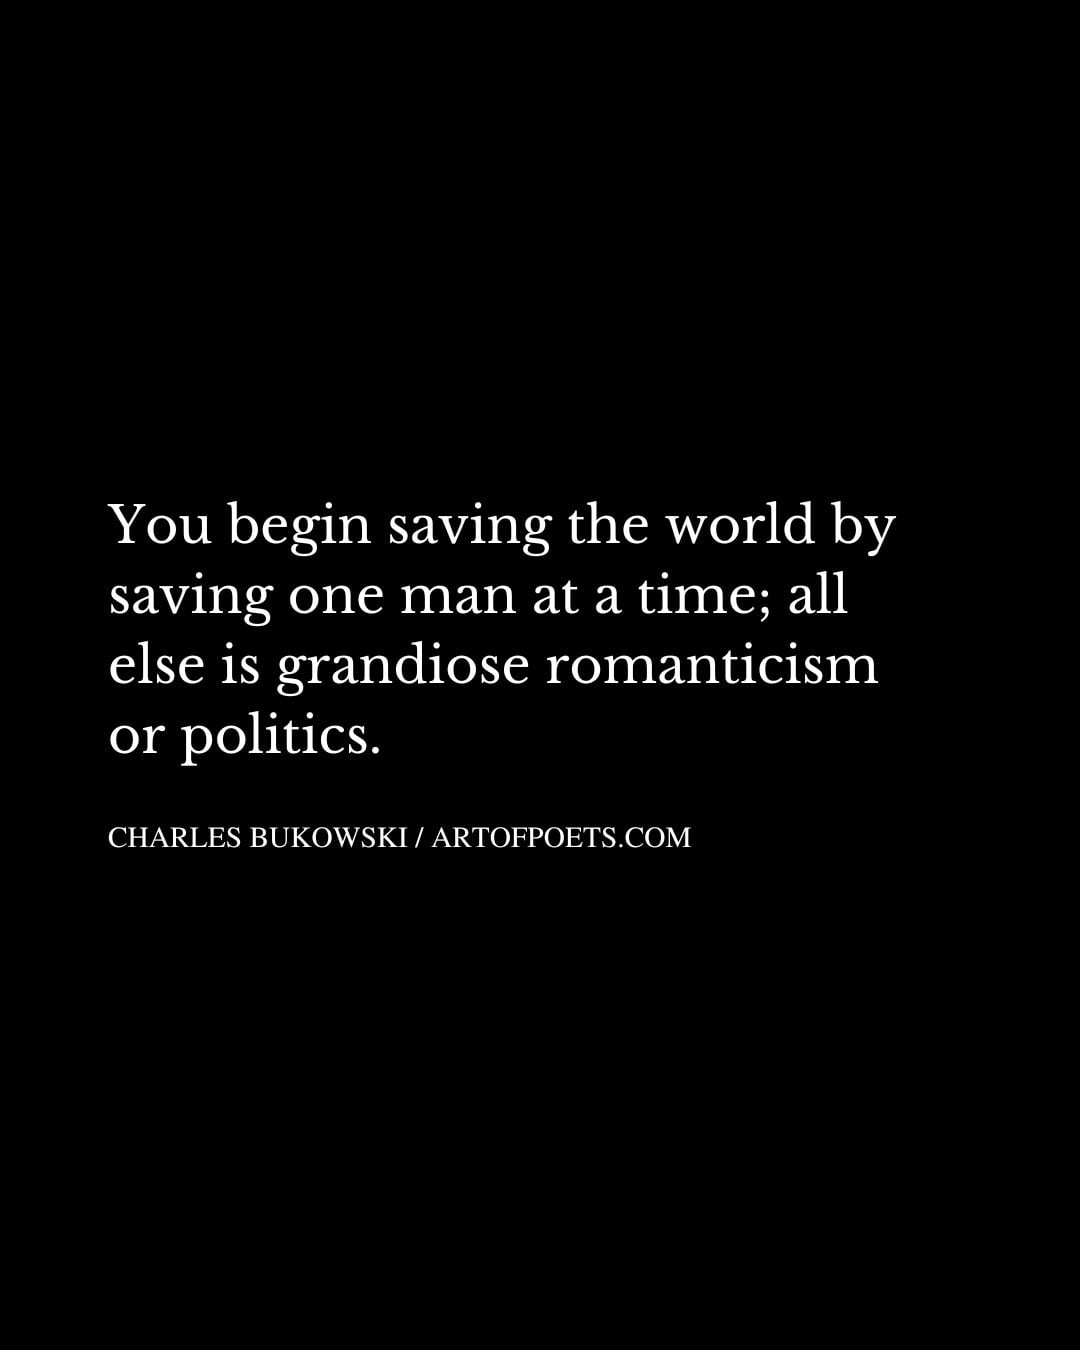 You begin saving the world by saving one man at a time all else is grandiose romanticism or politics